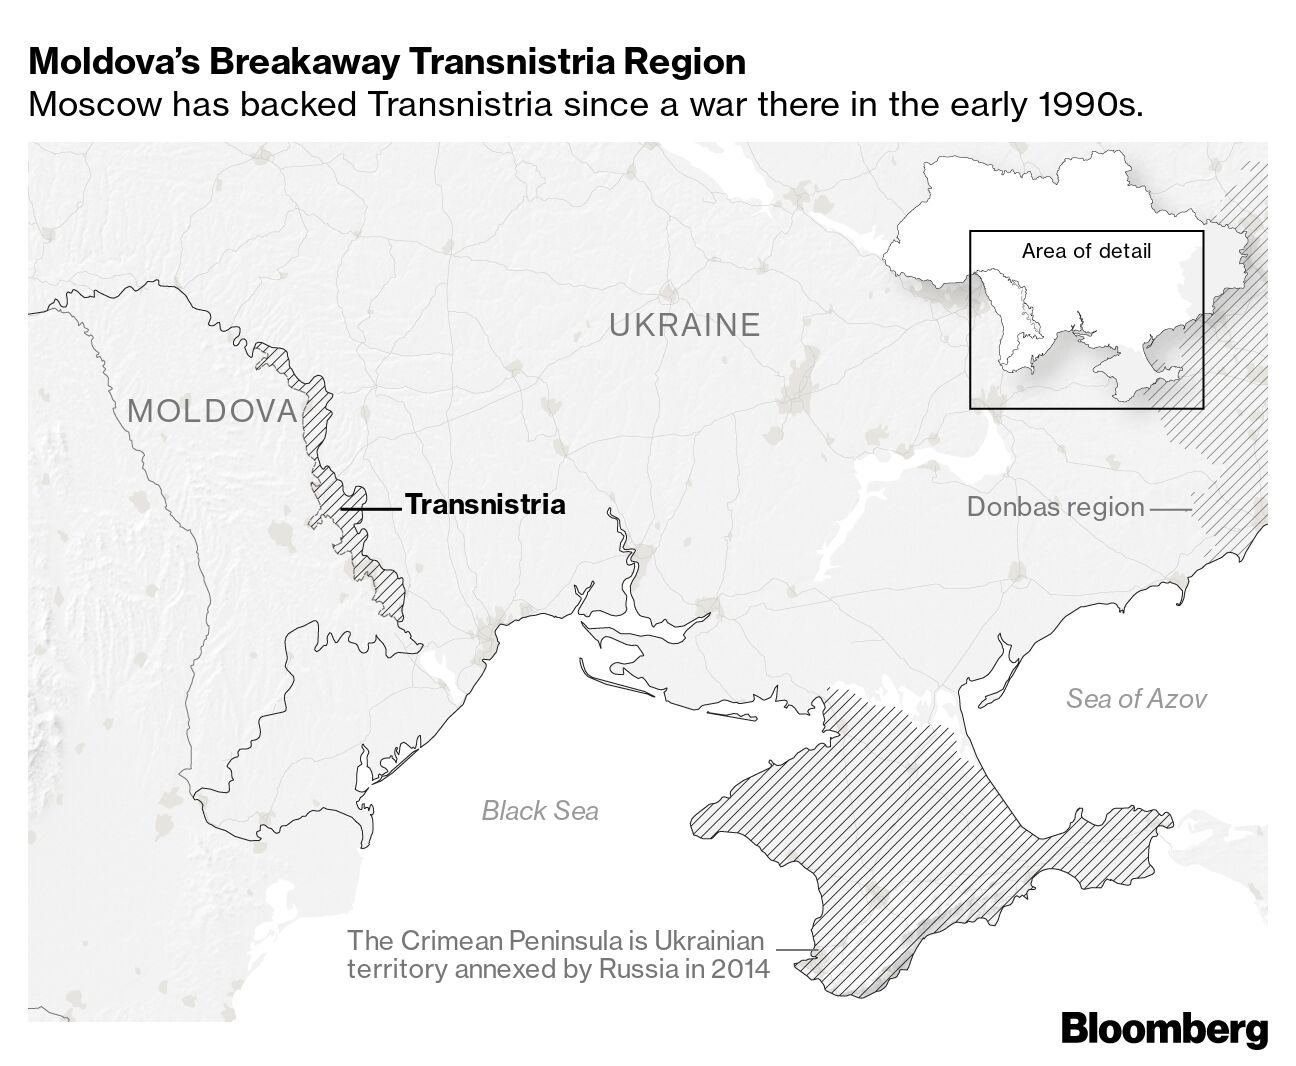 Transnistria Map Why Moldovas Breakaway Region Matters to Russia